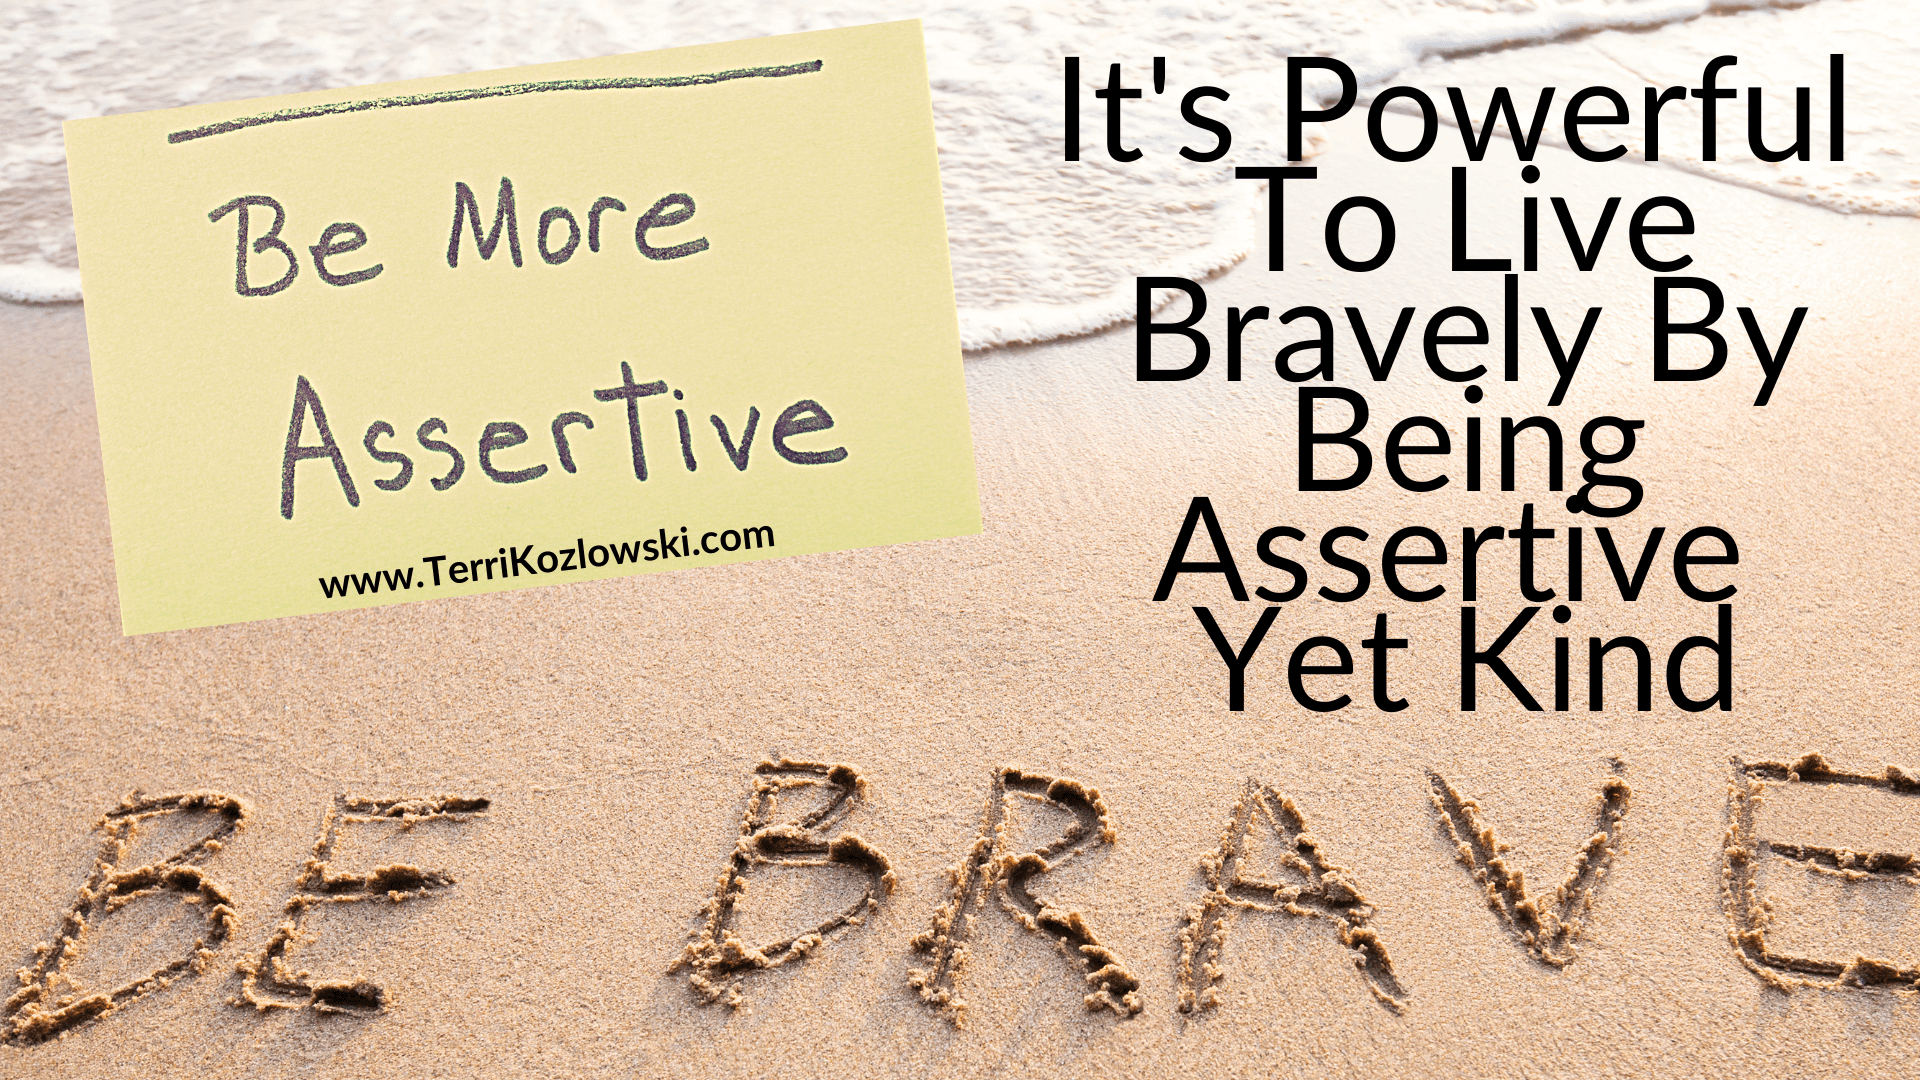 Be Assertive Yet Kind